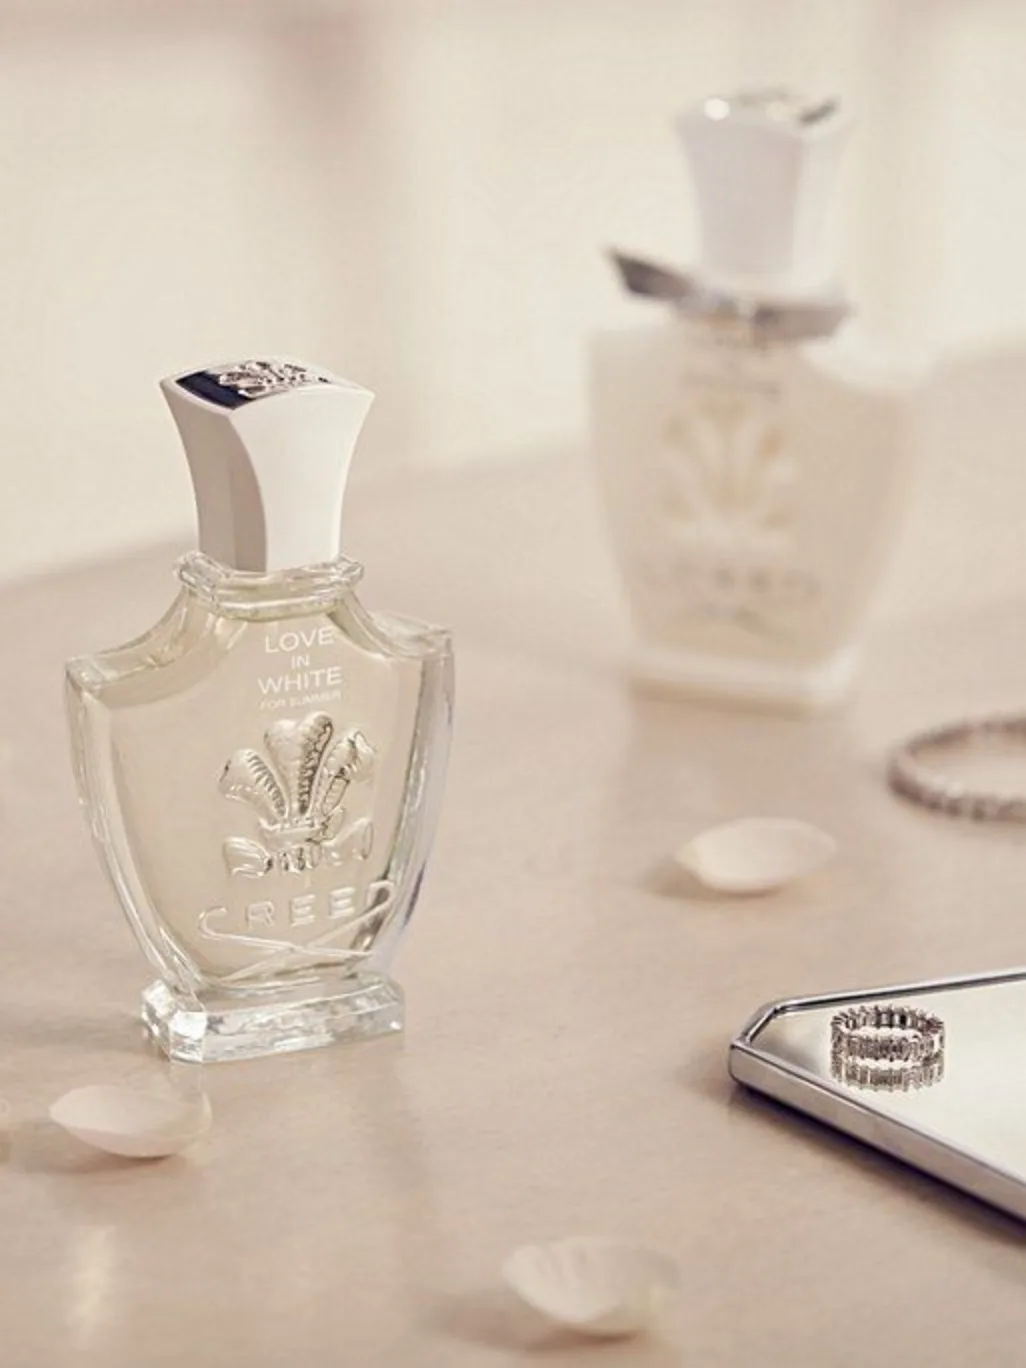 love-in-white-for-summer-is-the-best-cool-summer-cologne